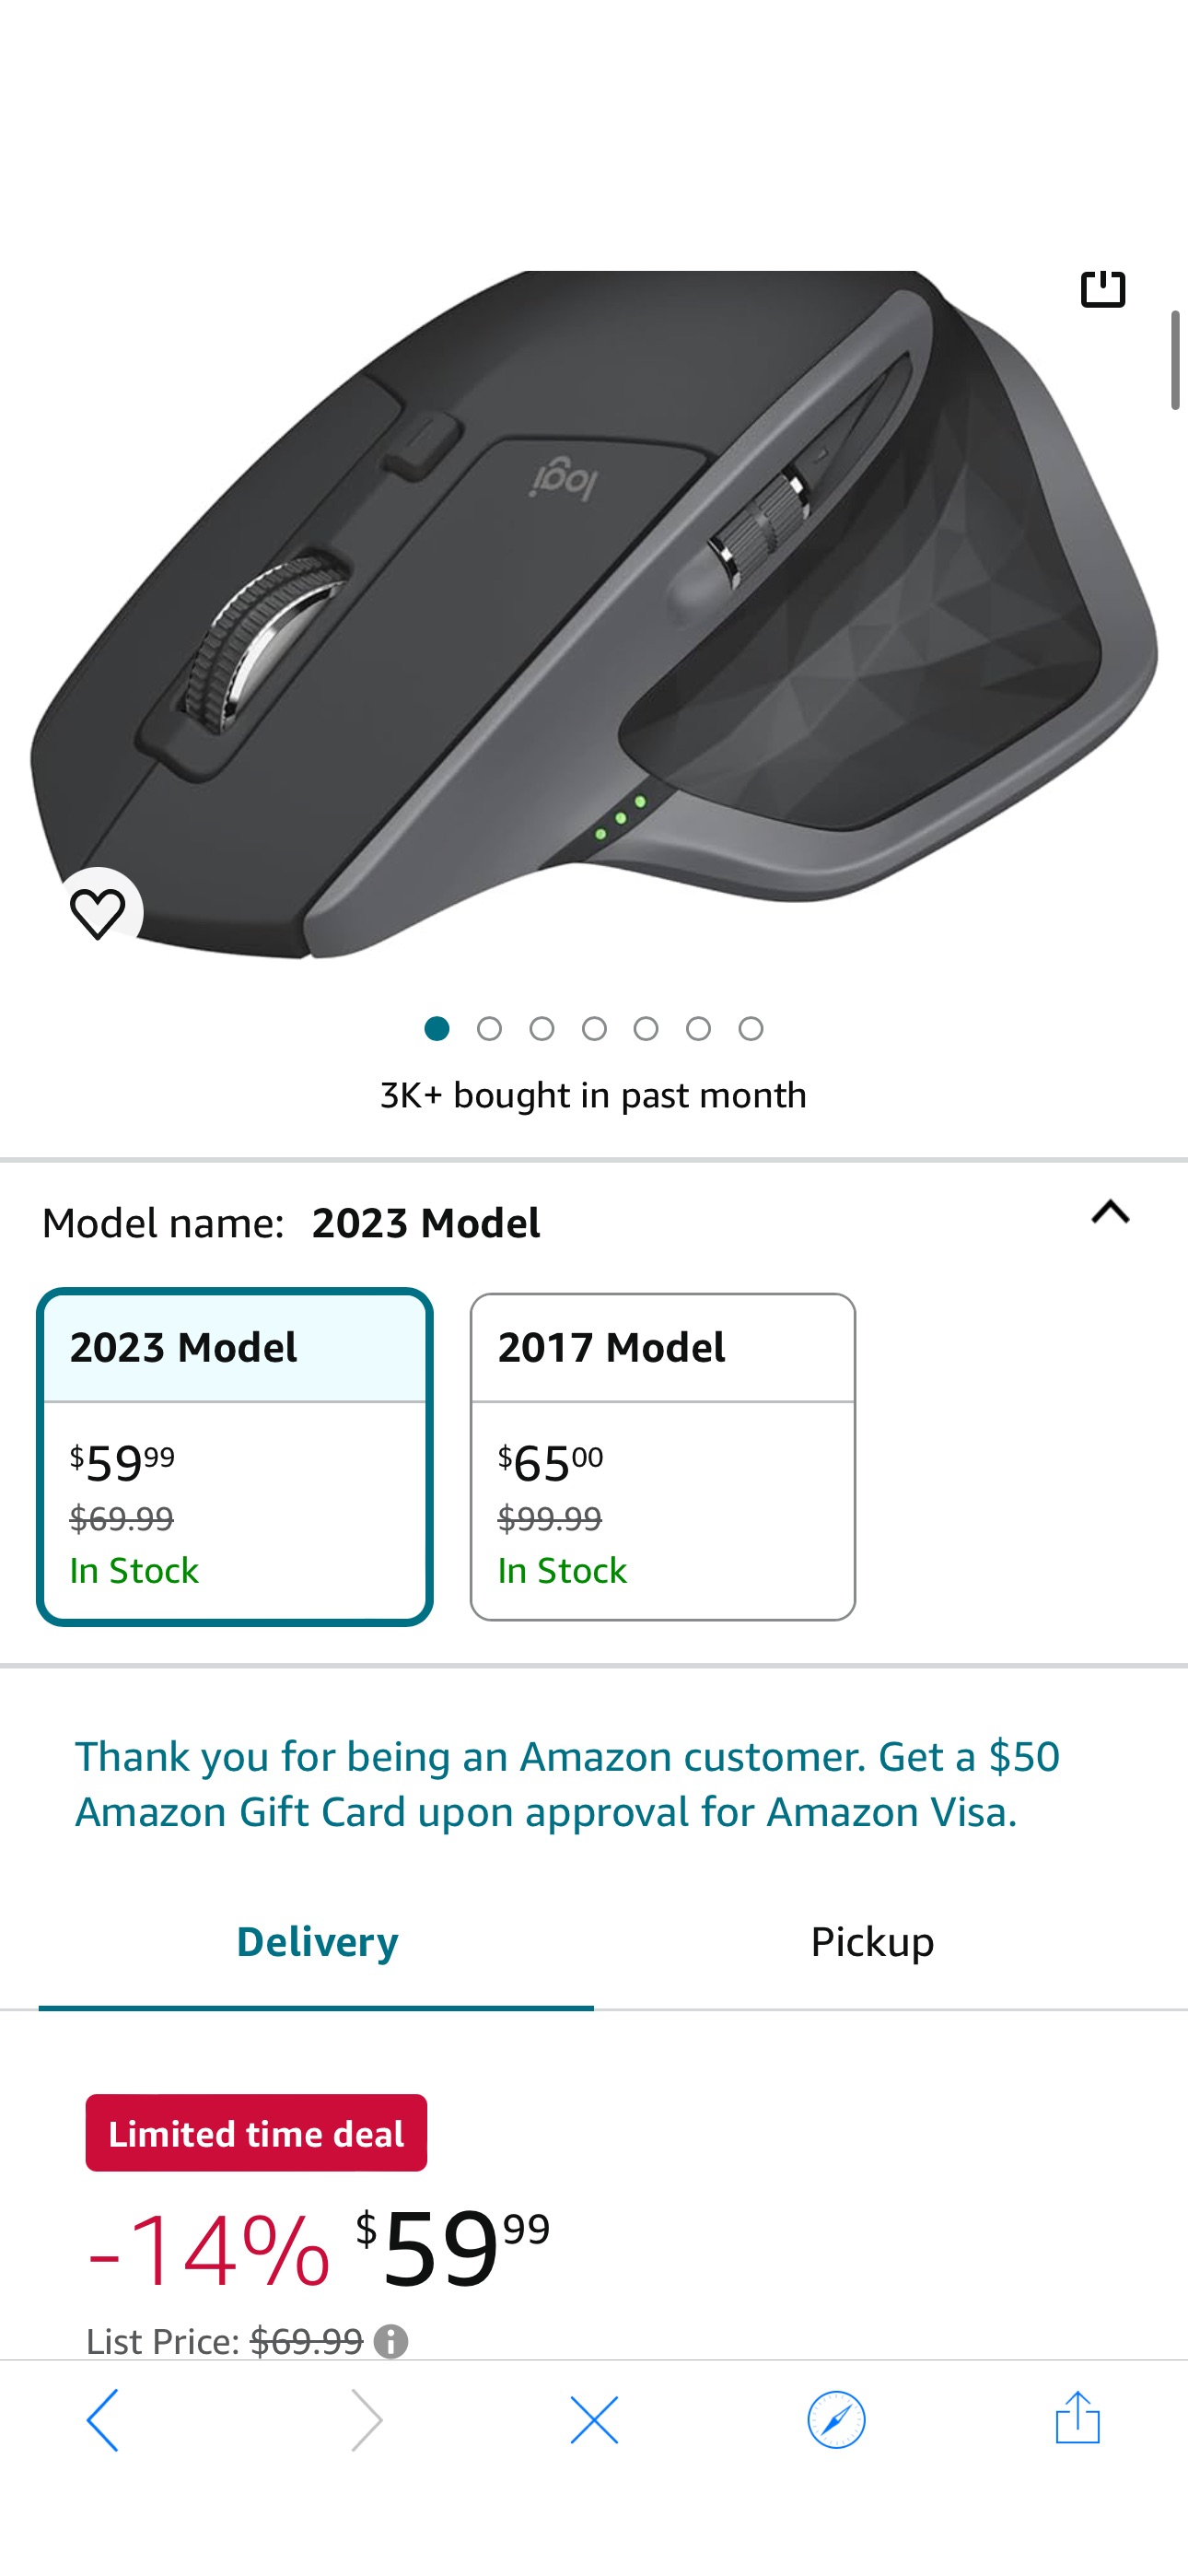 Amazon.com: Logitech MX Master 2S Bluetooth Edition Wireless Mouse – Use on Any Surface, Hyper-Fast Scrolling, Ergonomic, Rechargeable, Control Up to 3 Apple Mac and Windows Computers - Graphite : Ele